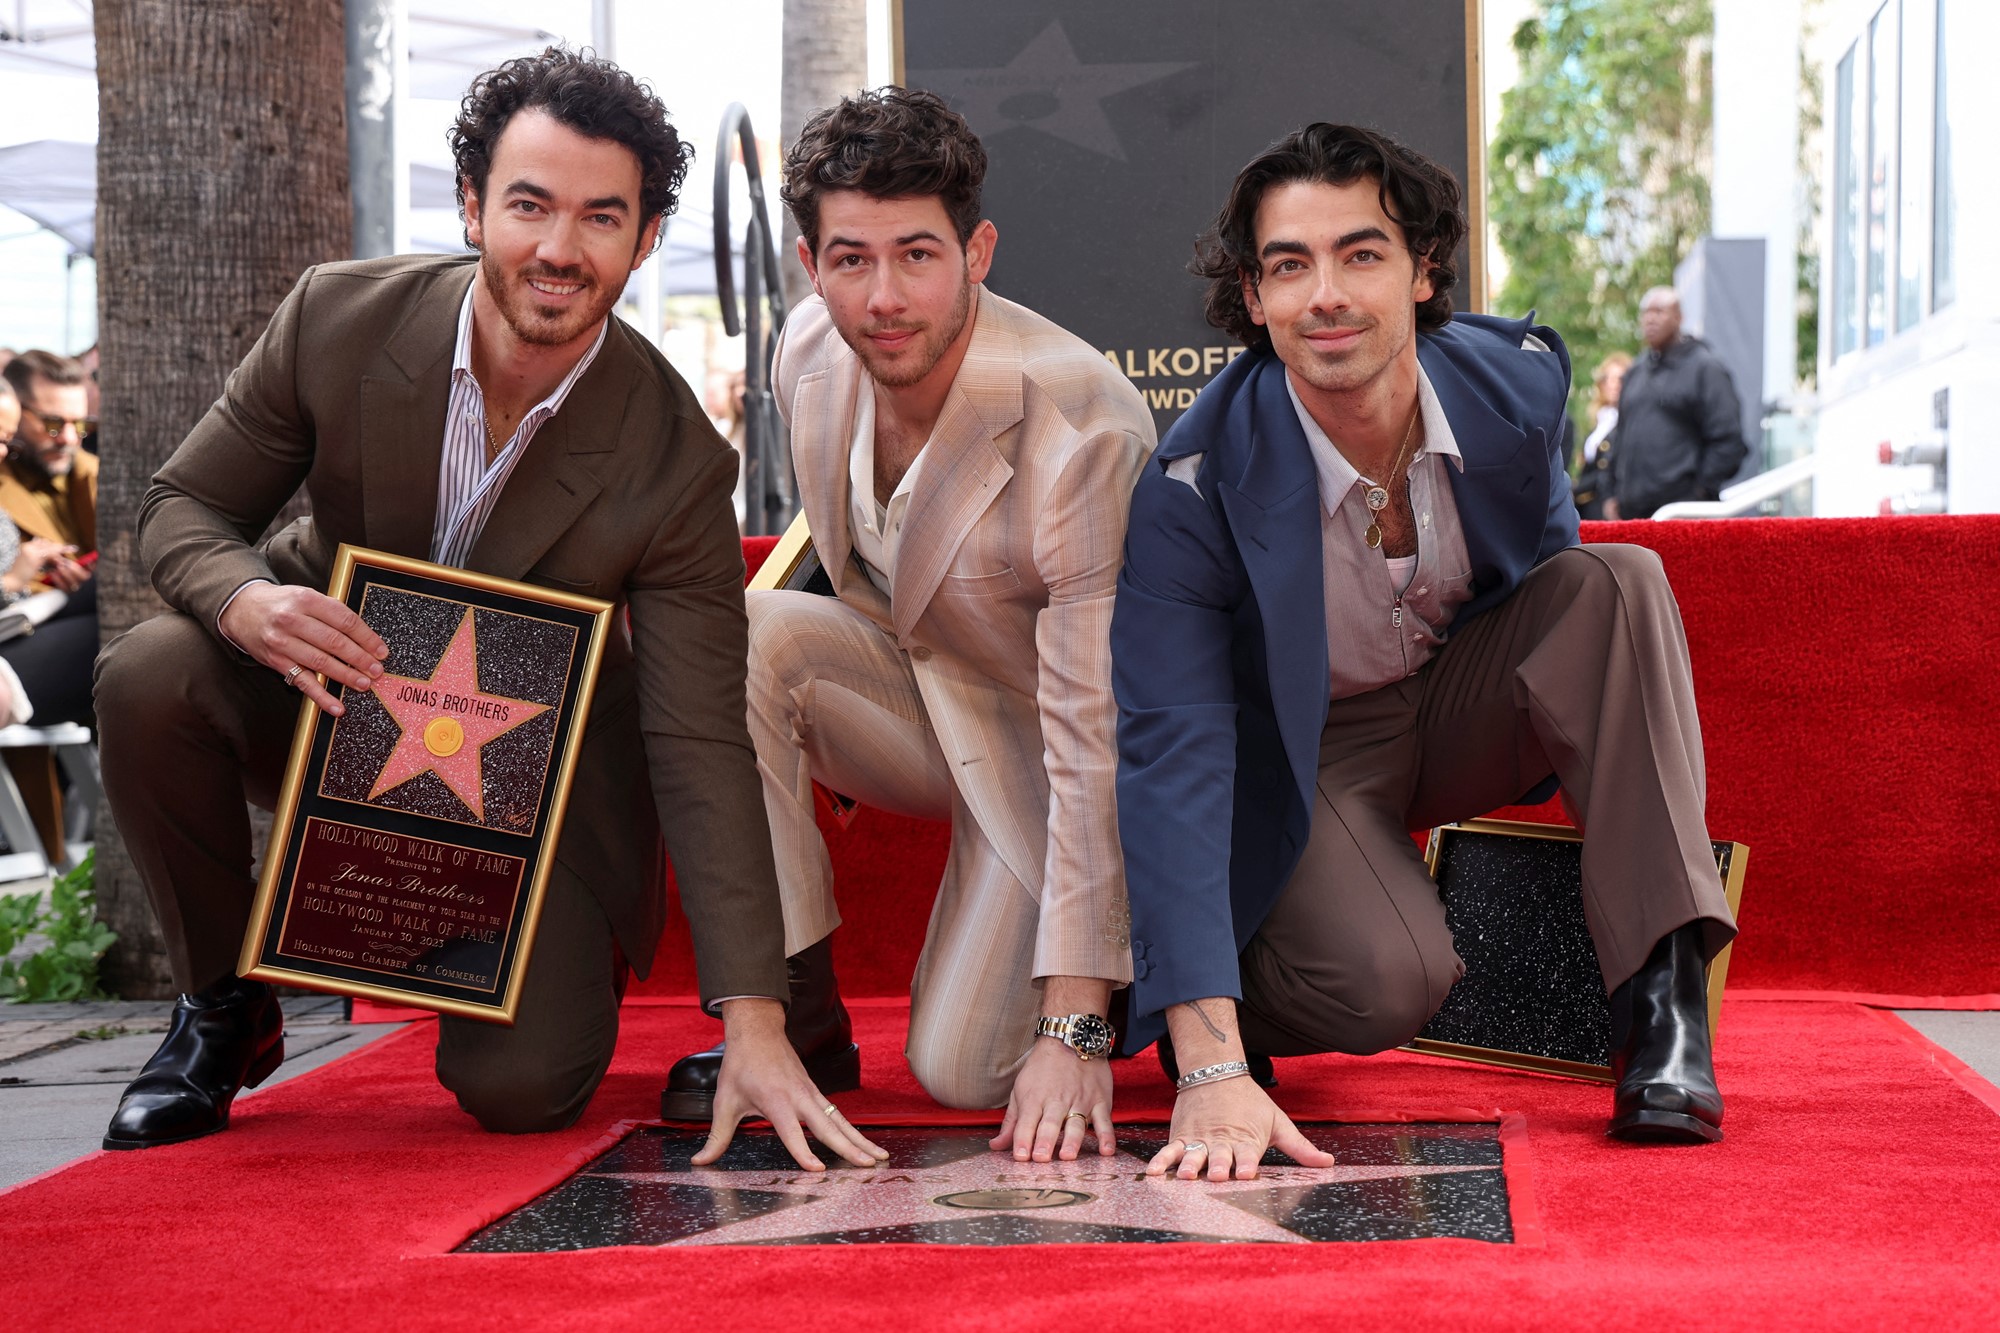 Three young men with dark hair and beards wearing suits kneel down pressing their hands on a star on the Hollywood Walk of Fame surrounded by red carpet.